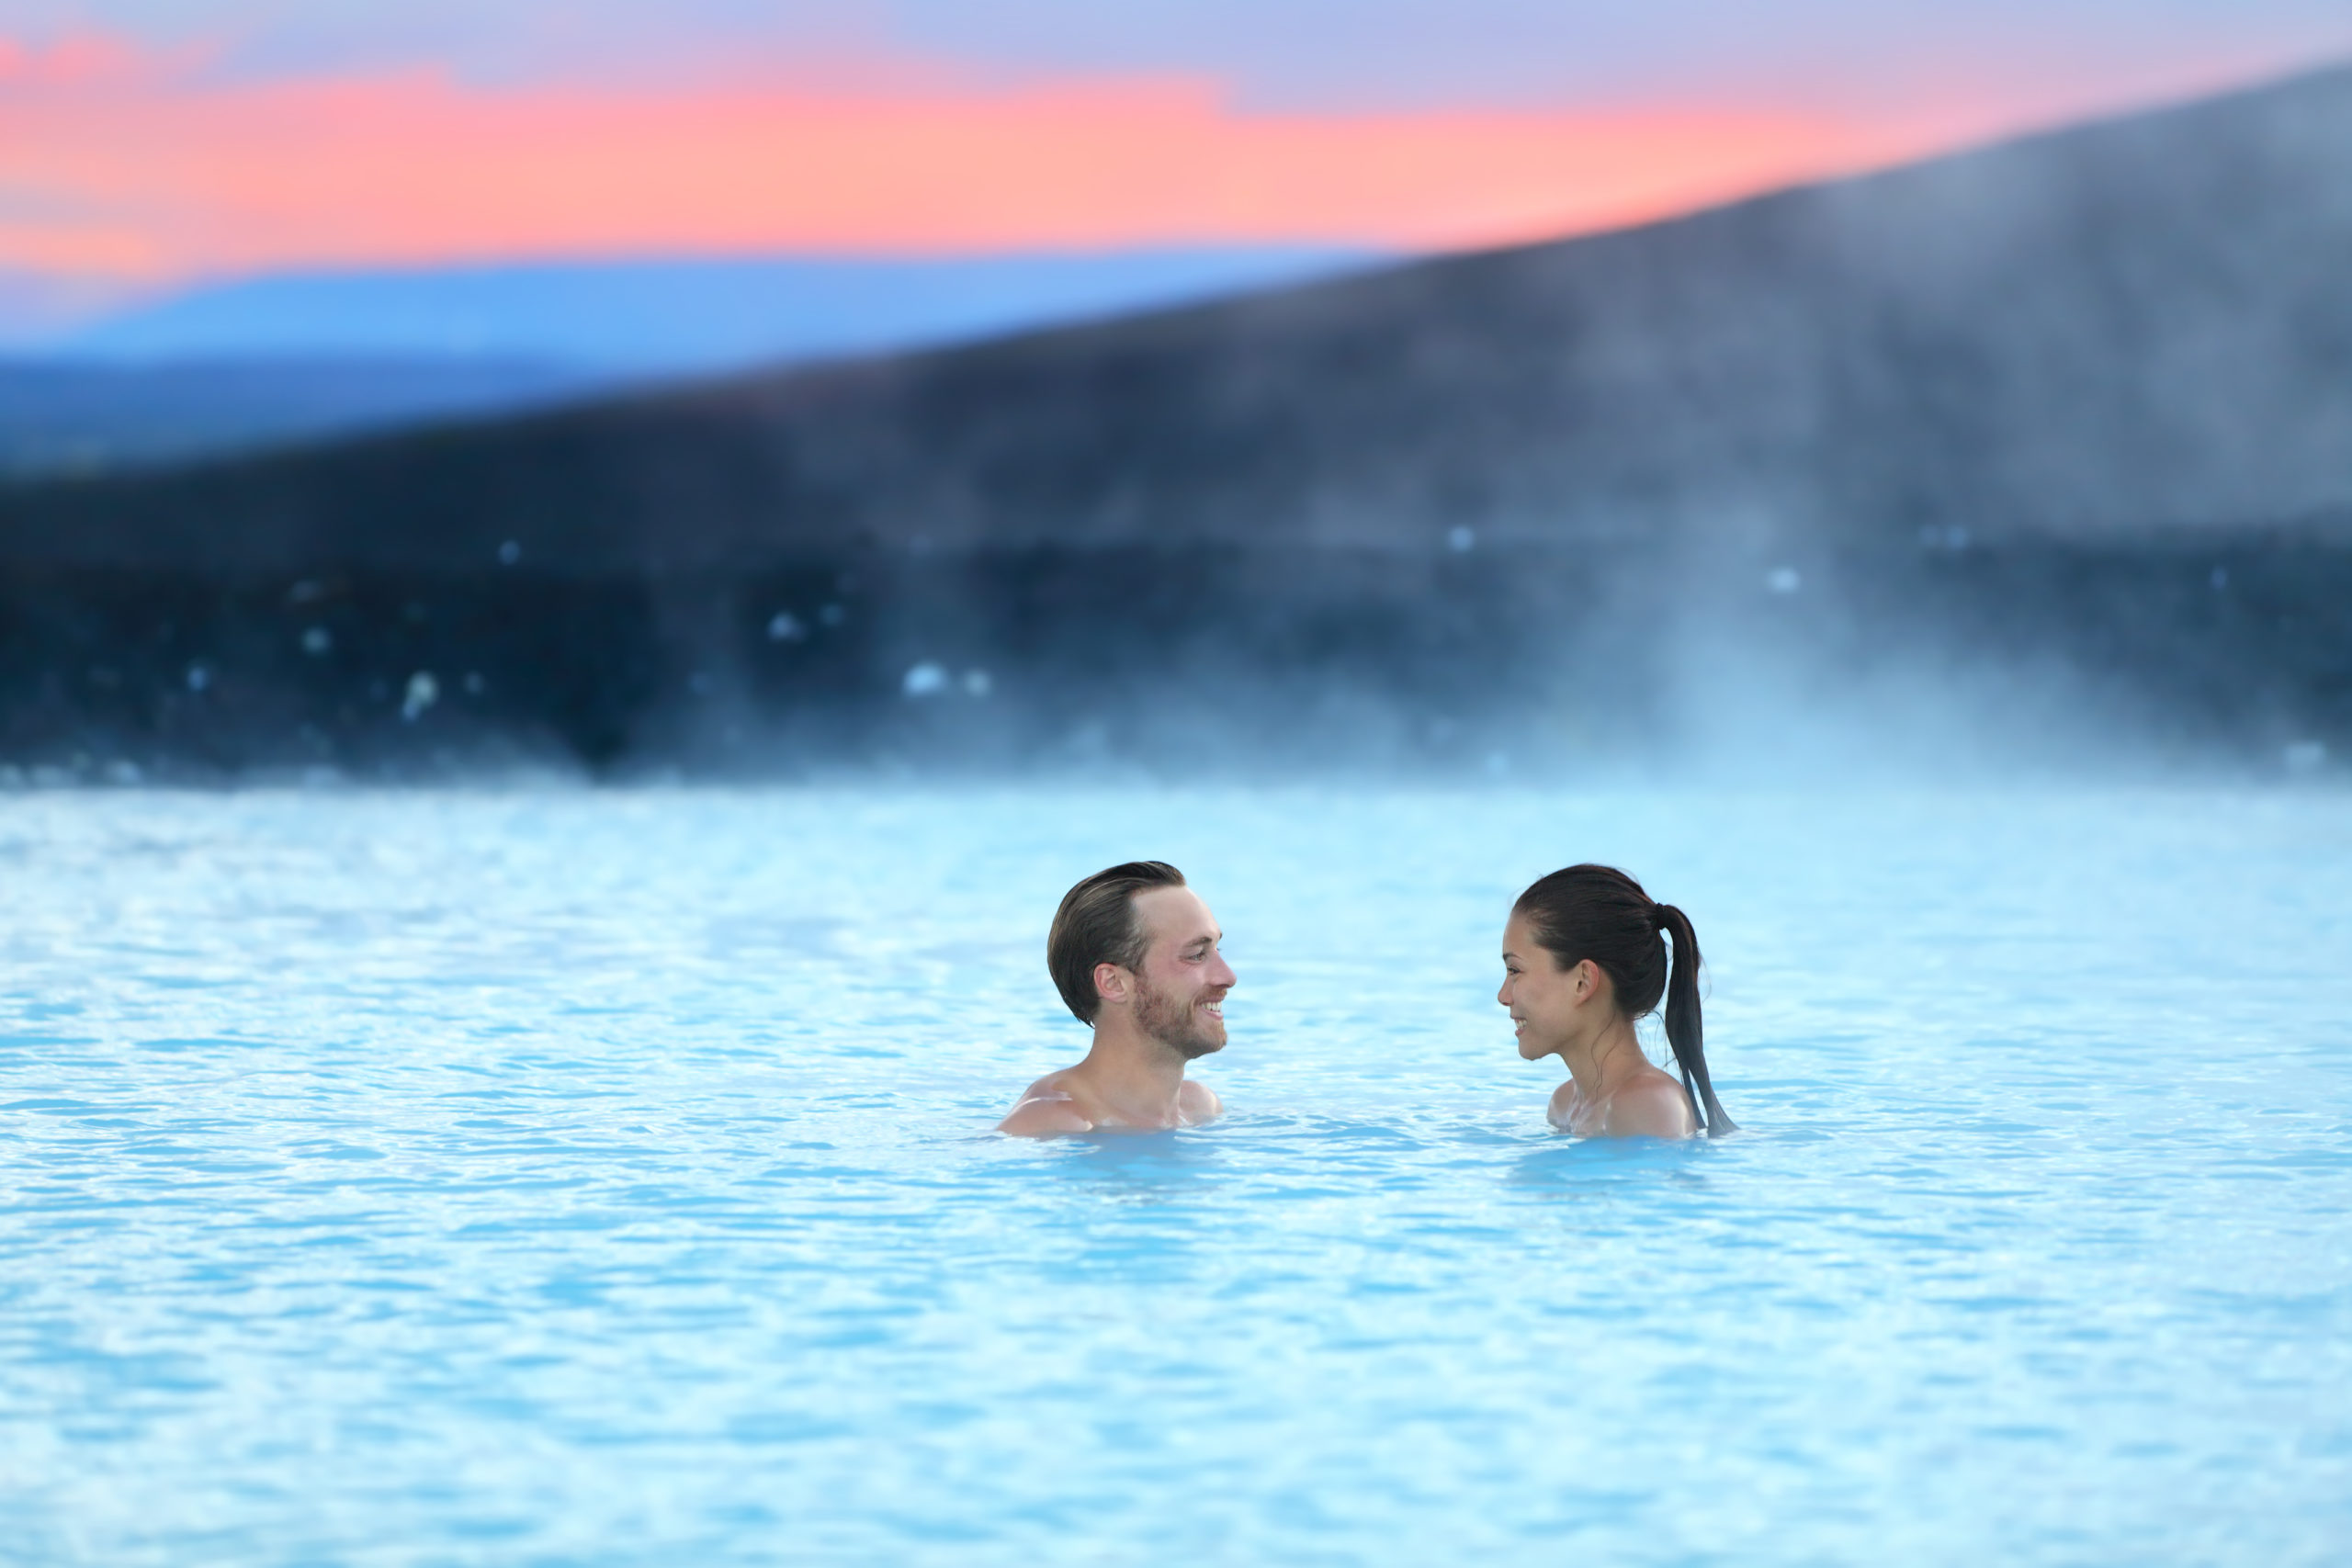 A couple relaxing in a natural hot spring, surrounded by rustic and untouched natural beauty, enjoying a warm soak in the geothermal waters.